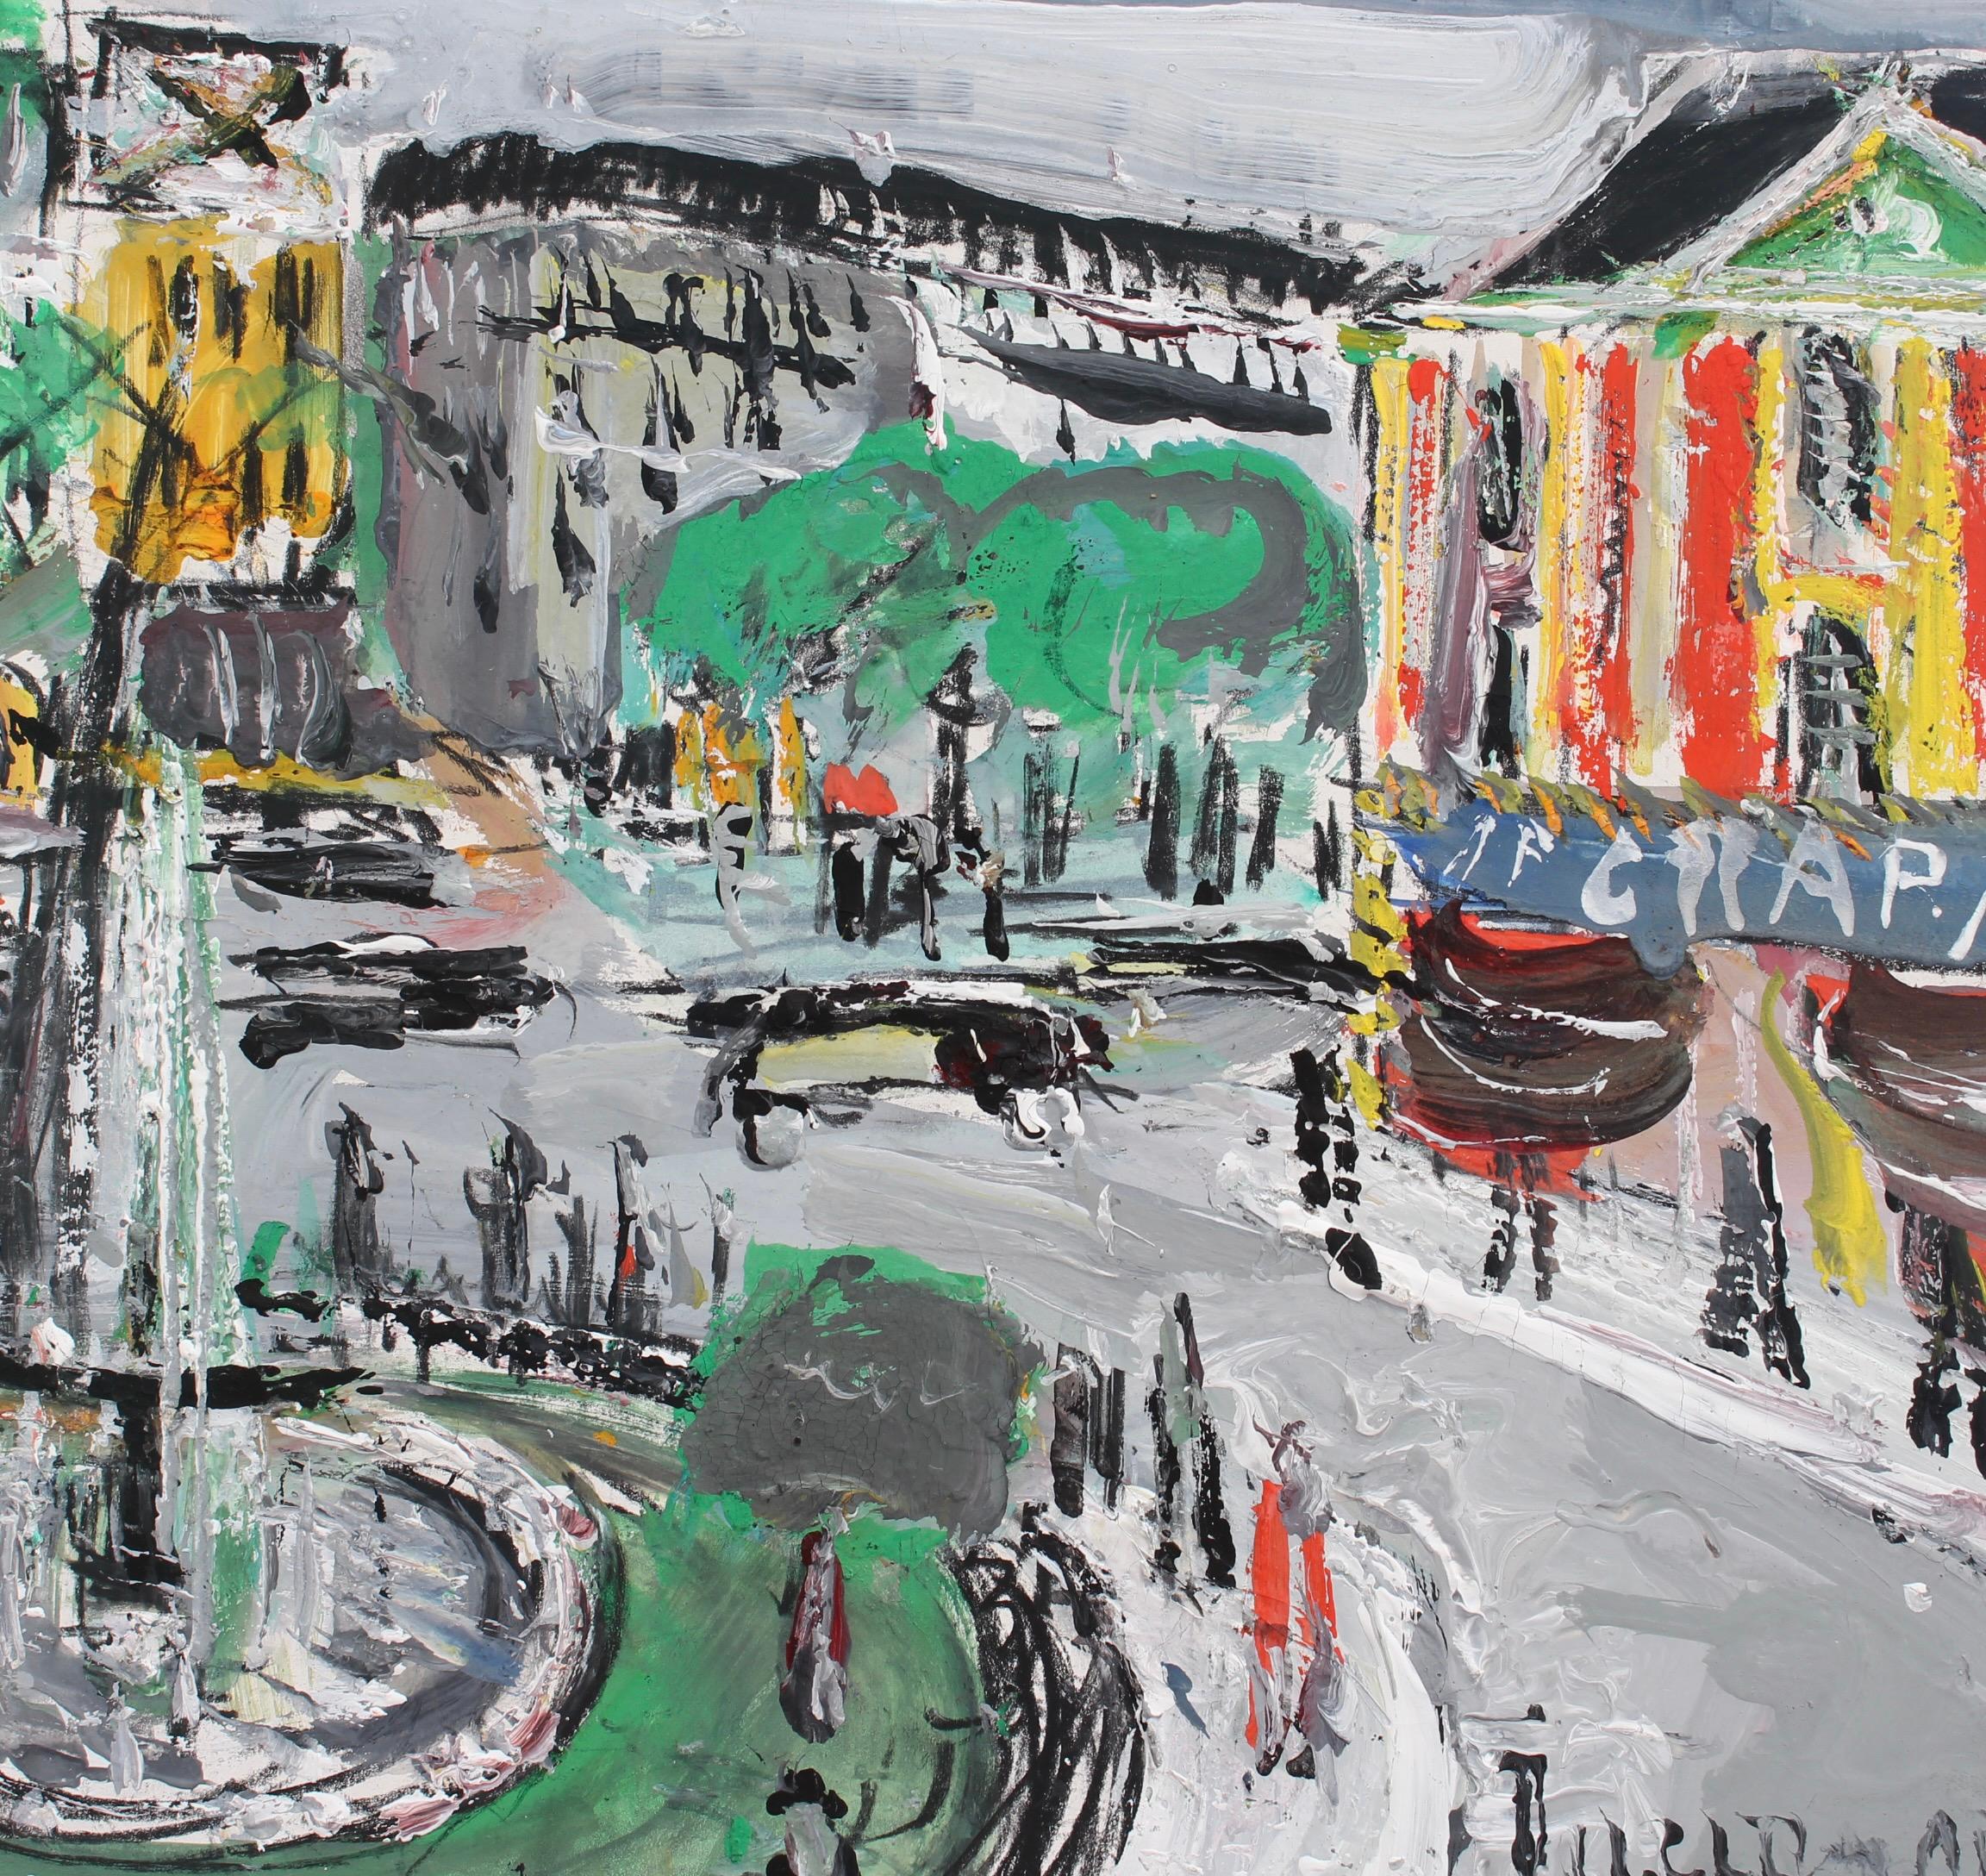 'Place Pigalle', oil and gouache on art paper, by Lucien Génin (circa 1930s). Pigalle is well known to tourists who want to experience 